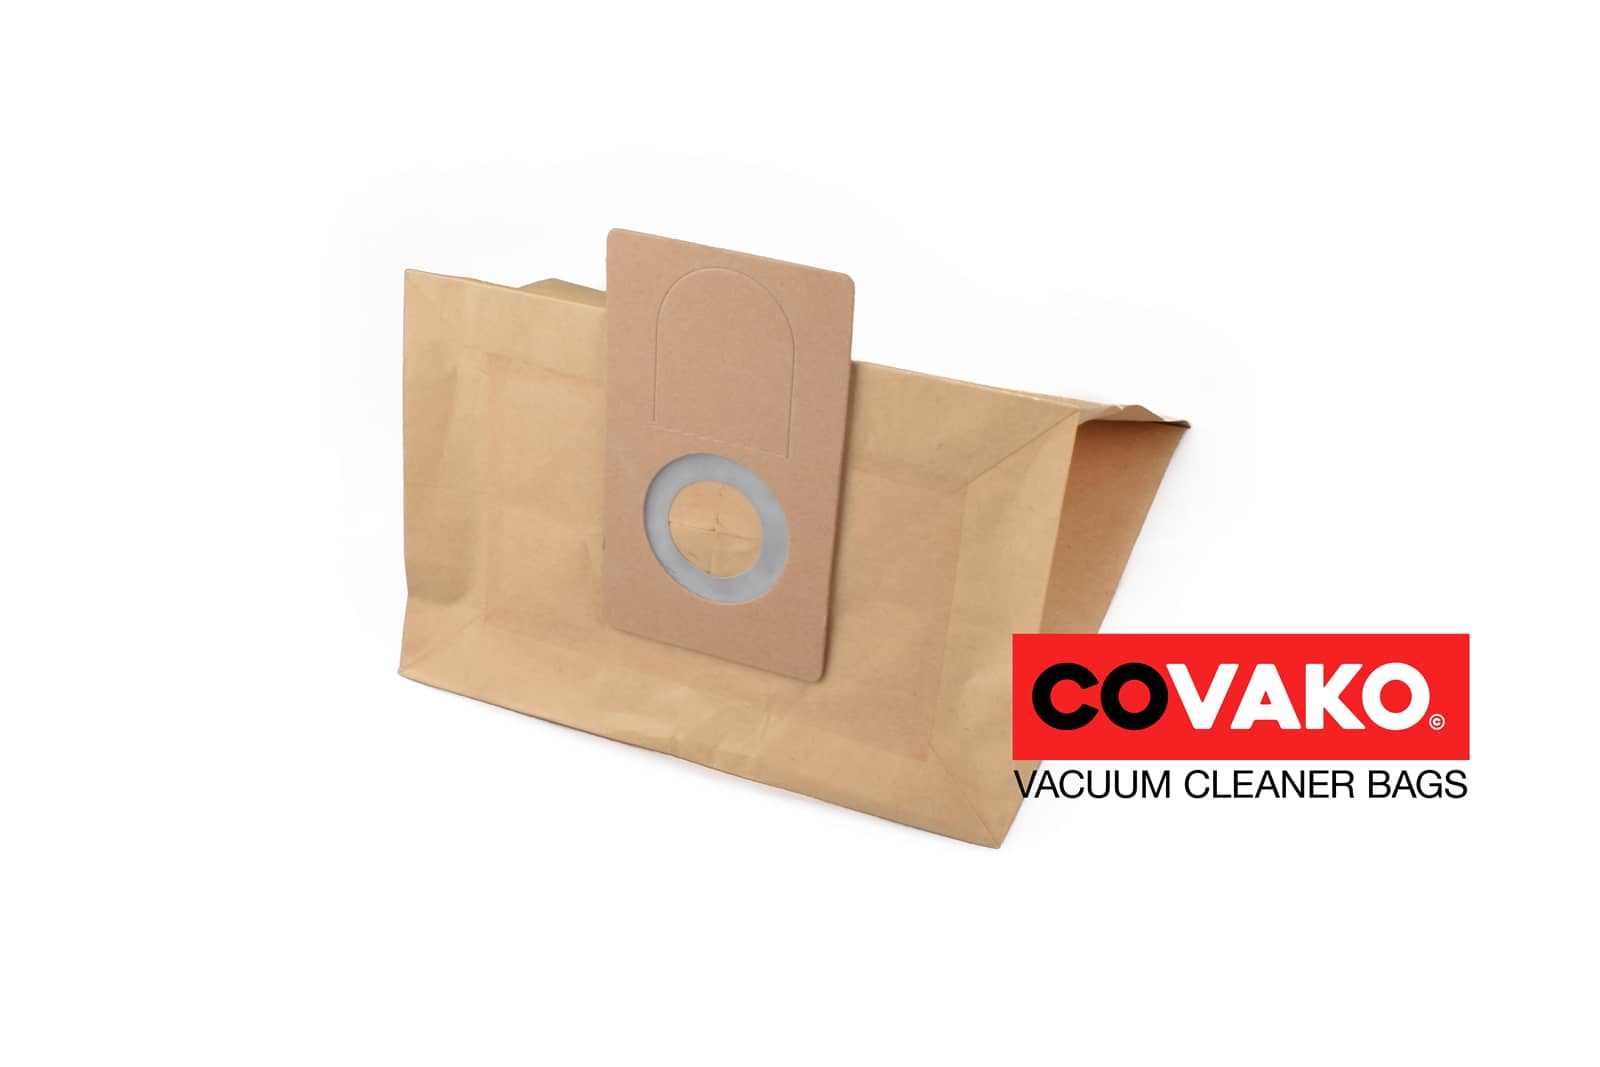 Oehme Otto S1 / Paper - Oehme Otto vacuum cleaner bags